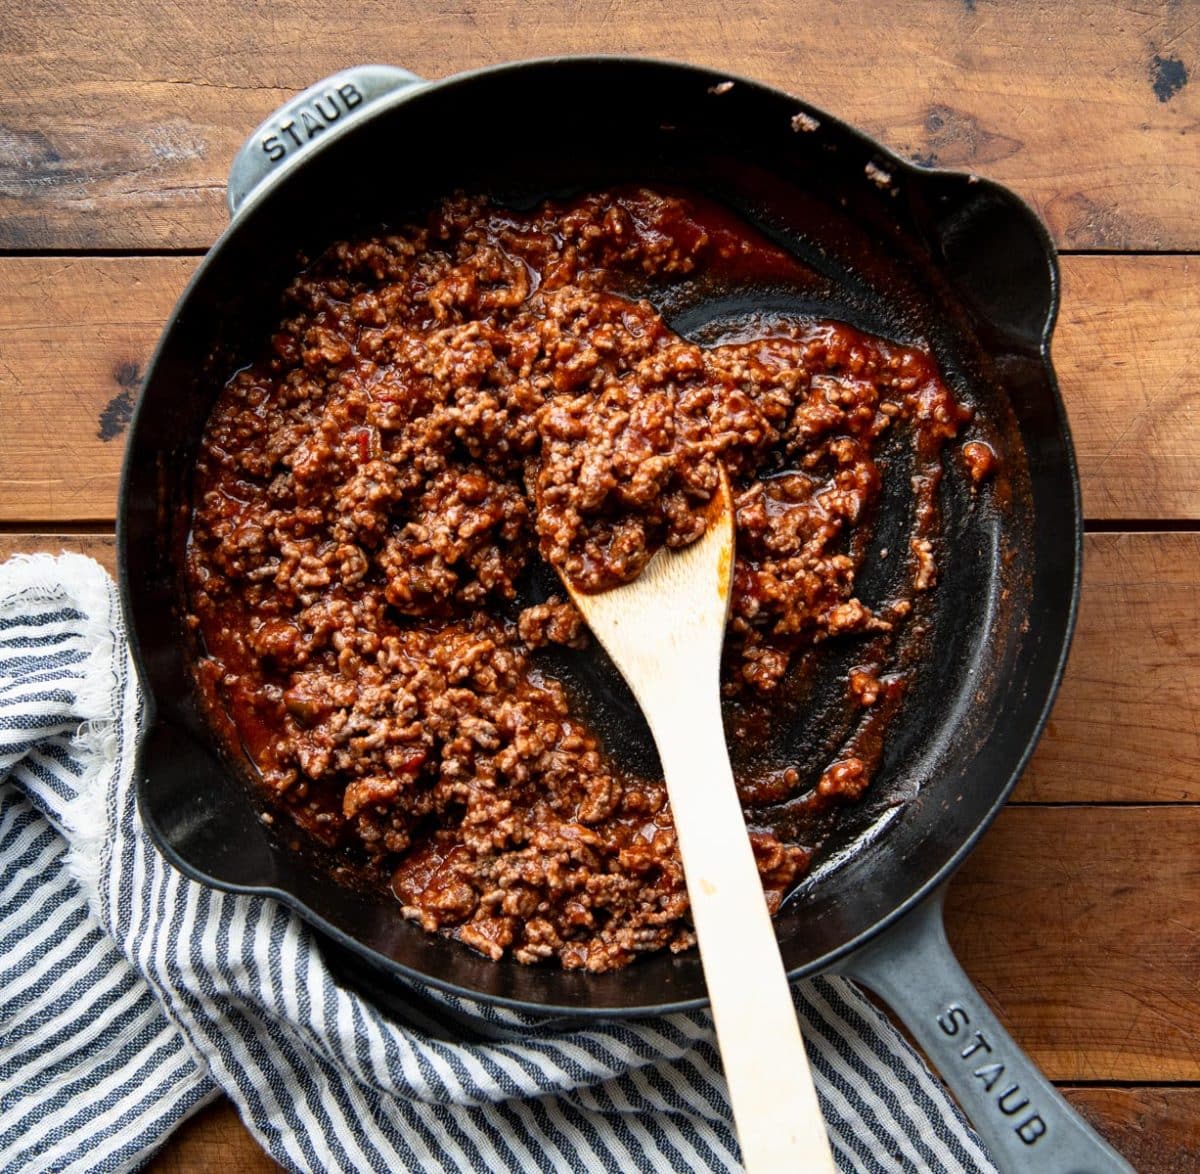 Sloppy joe sauce and ground beef in a cast iron skillet.